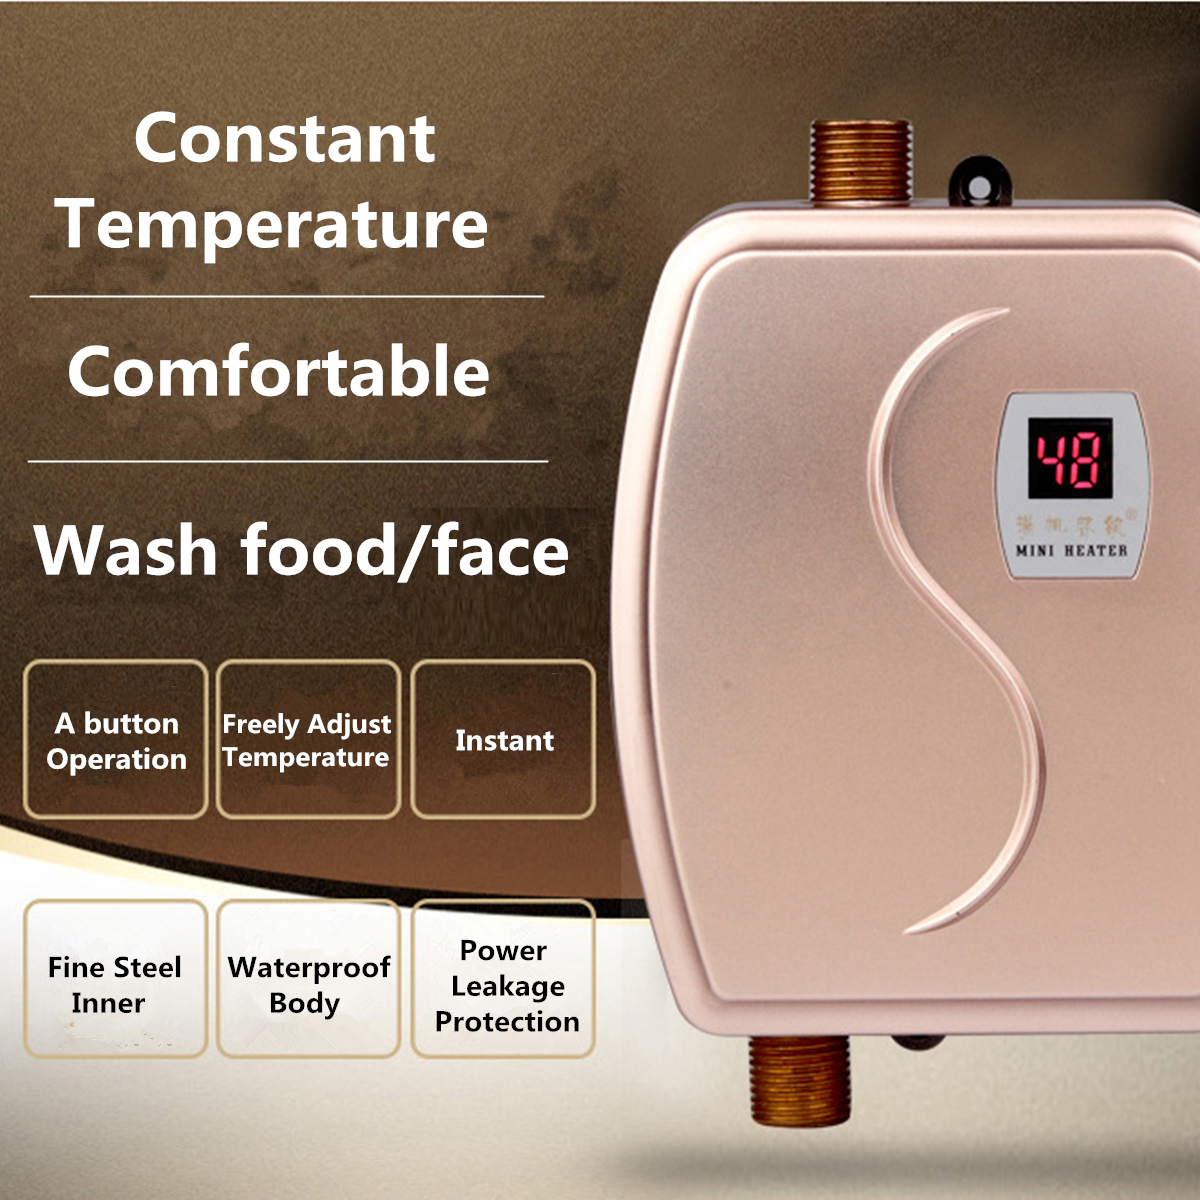 3800W-Mini-Instant-Electric-Tankless-Water-Heater-Faucet-Home-Bathroom-Sink-Tap-USEU-Plug-1406481-4